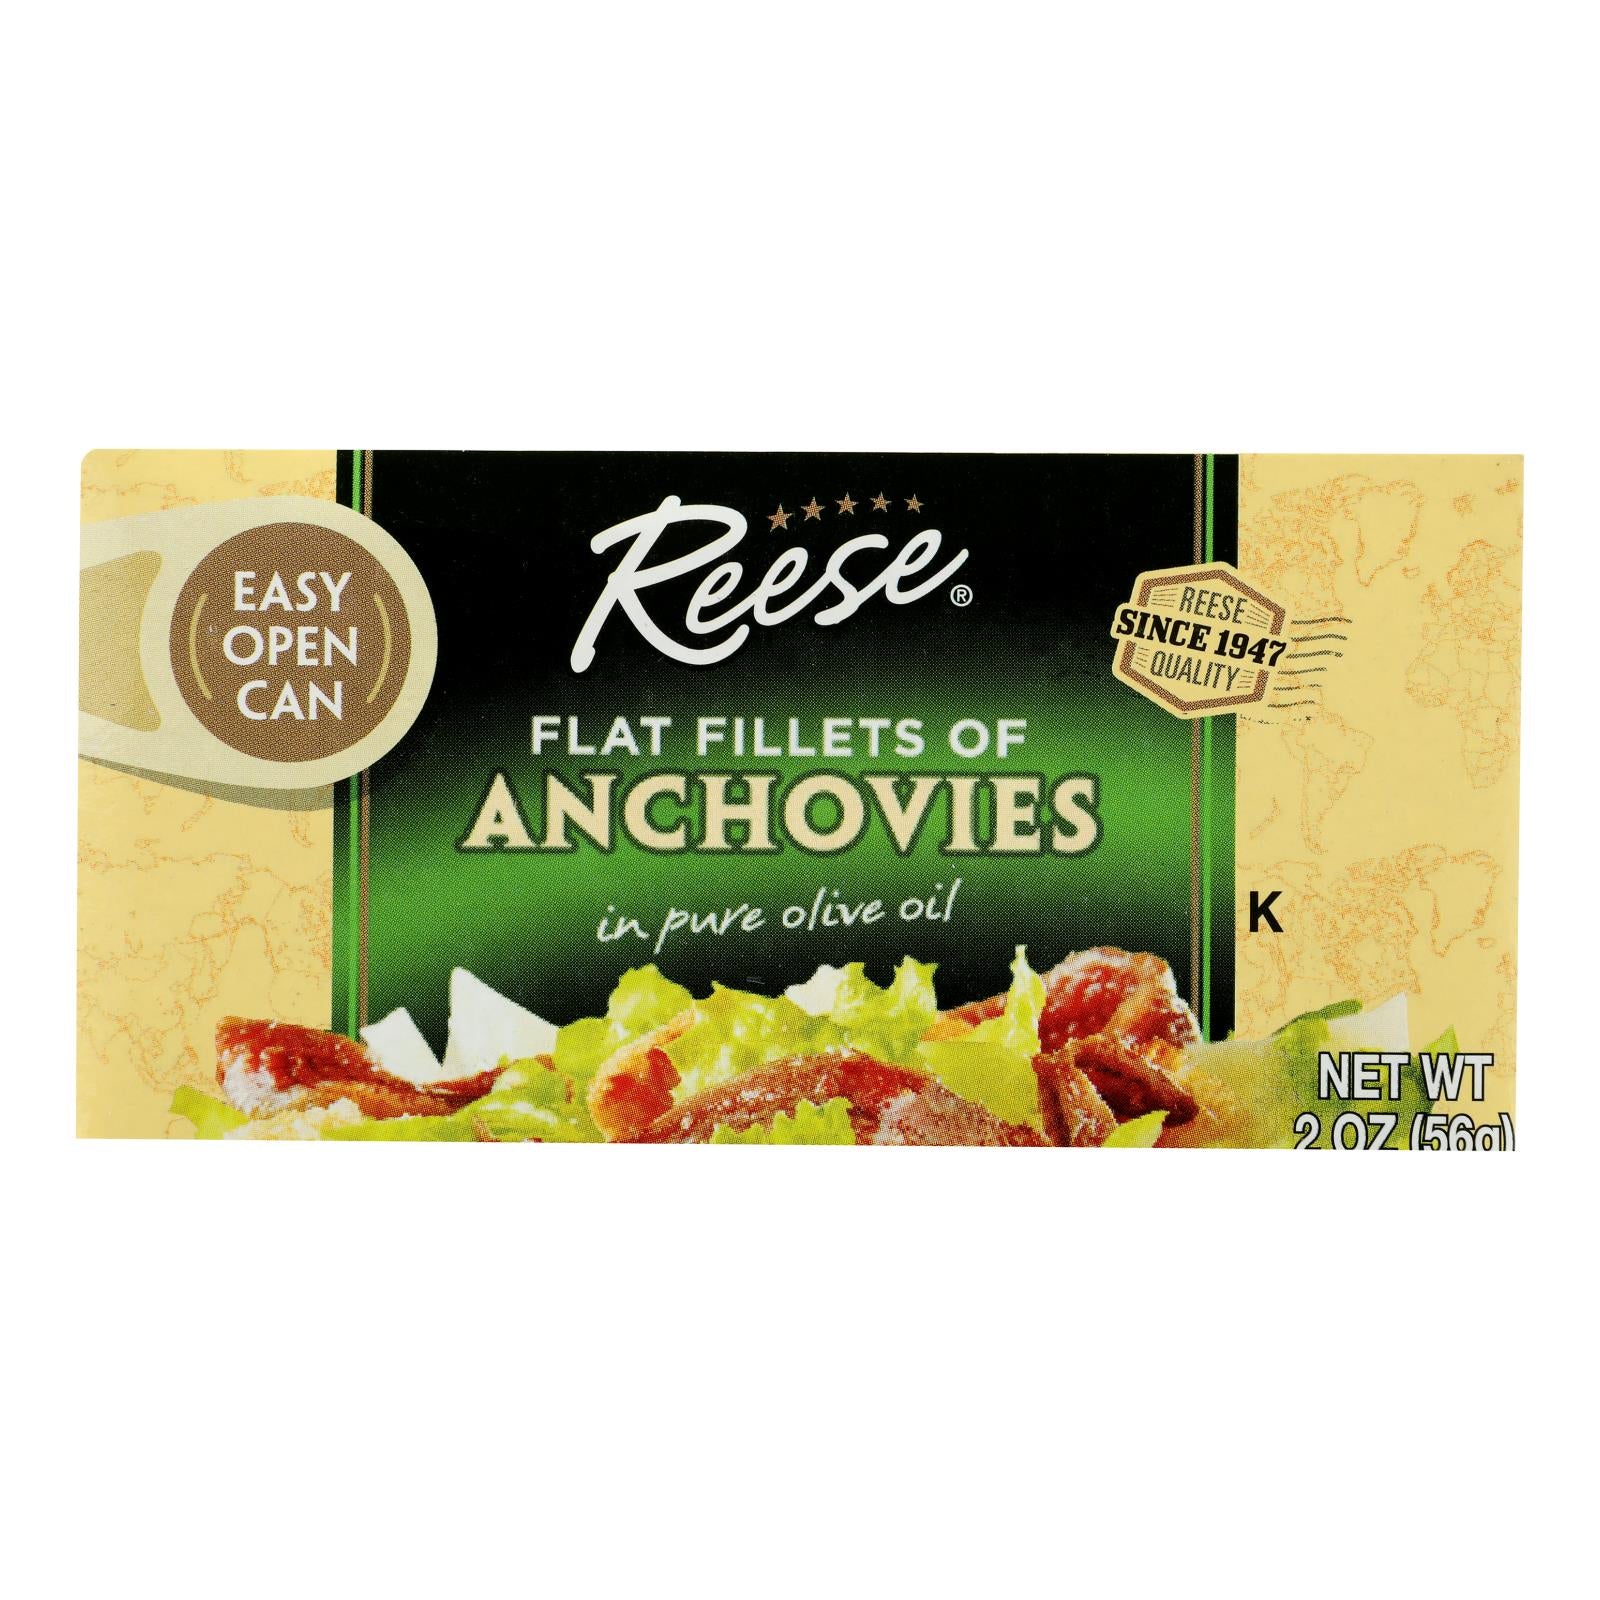 Reese Anchovies - Flat Fillets - in Pure Olive Oil - 2 oz - Case of 10